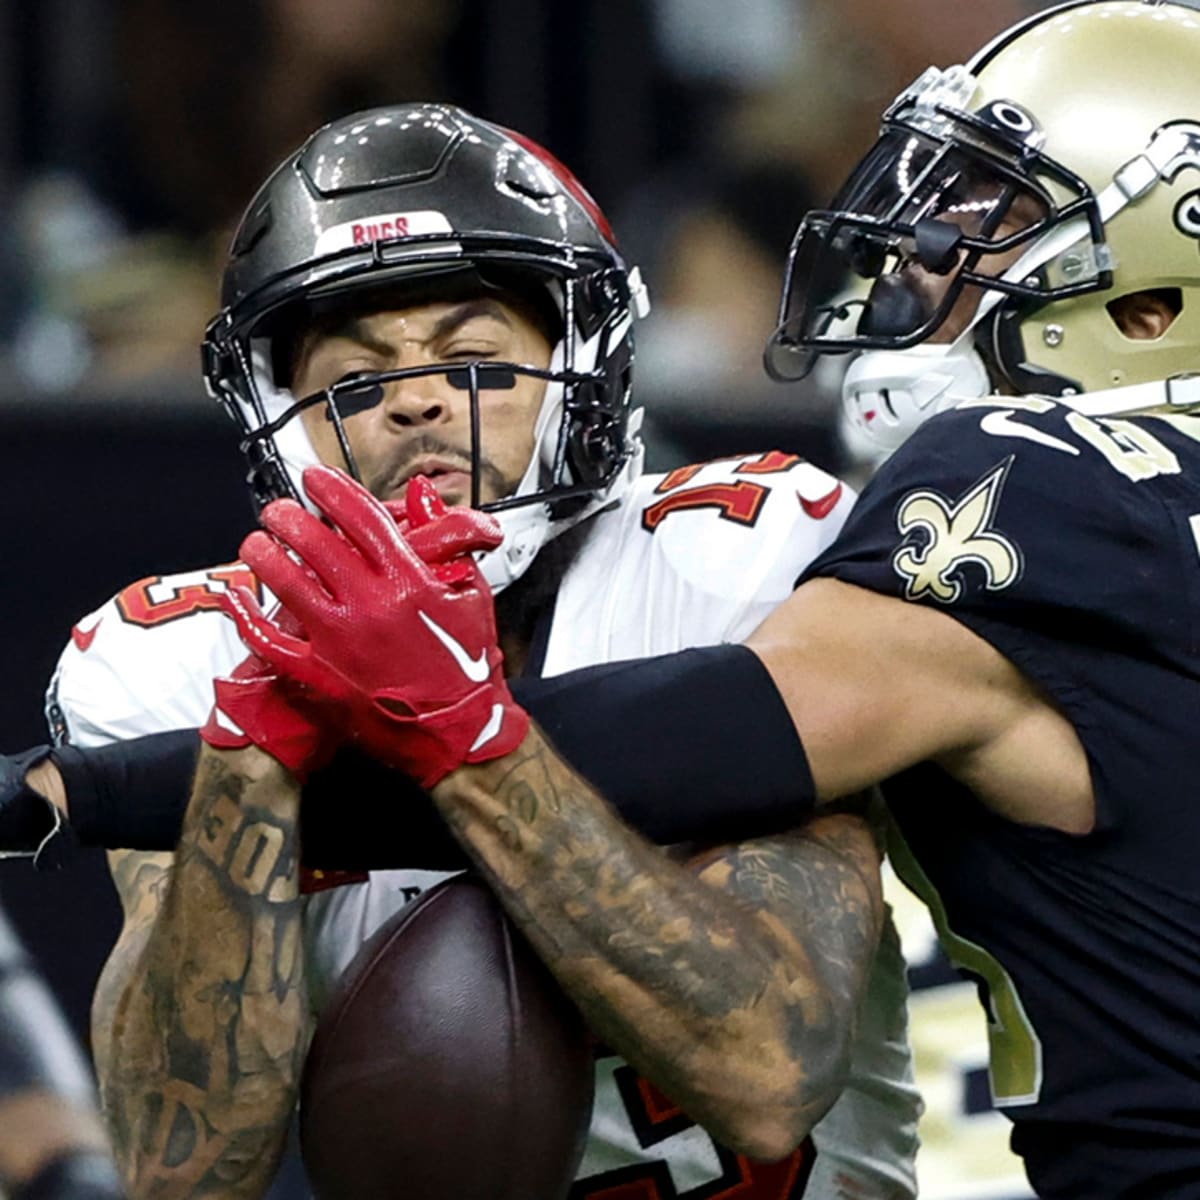 Buccaneers vs Saints Brawl - Lattimore and Mike Evans Ejected